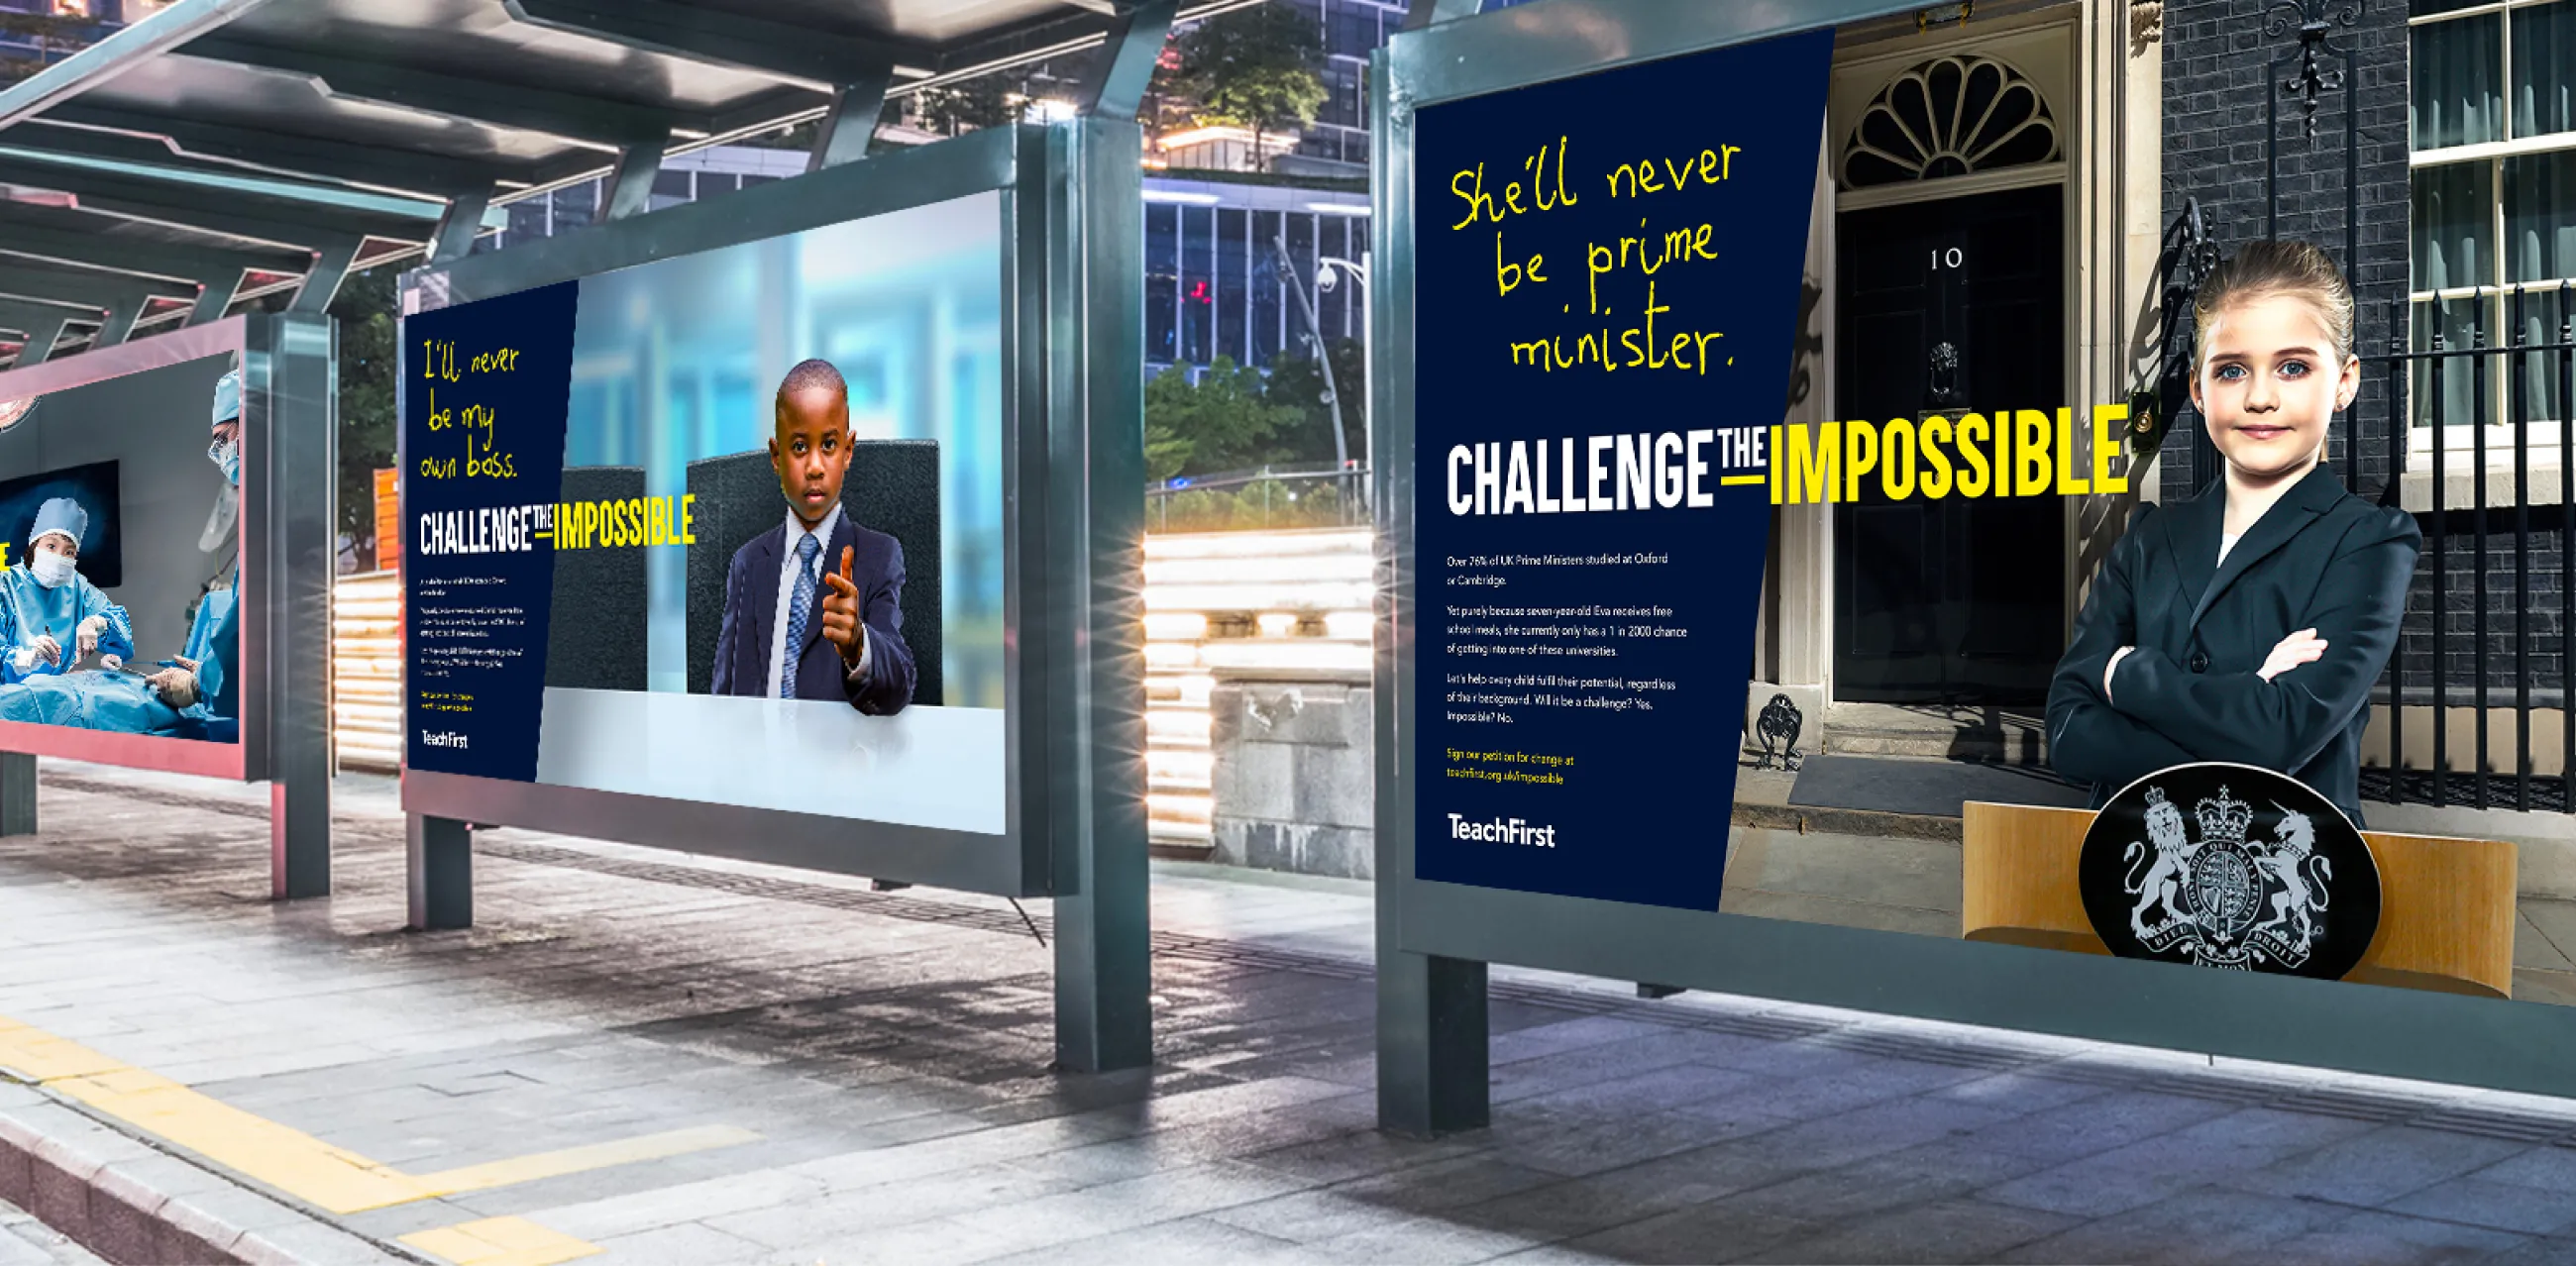 Teach First "Challenge the Impossible" campaign advertising billboards